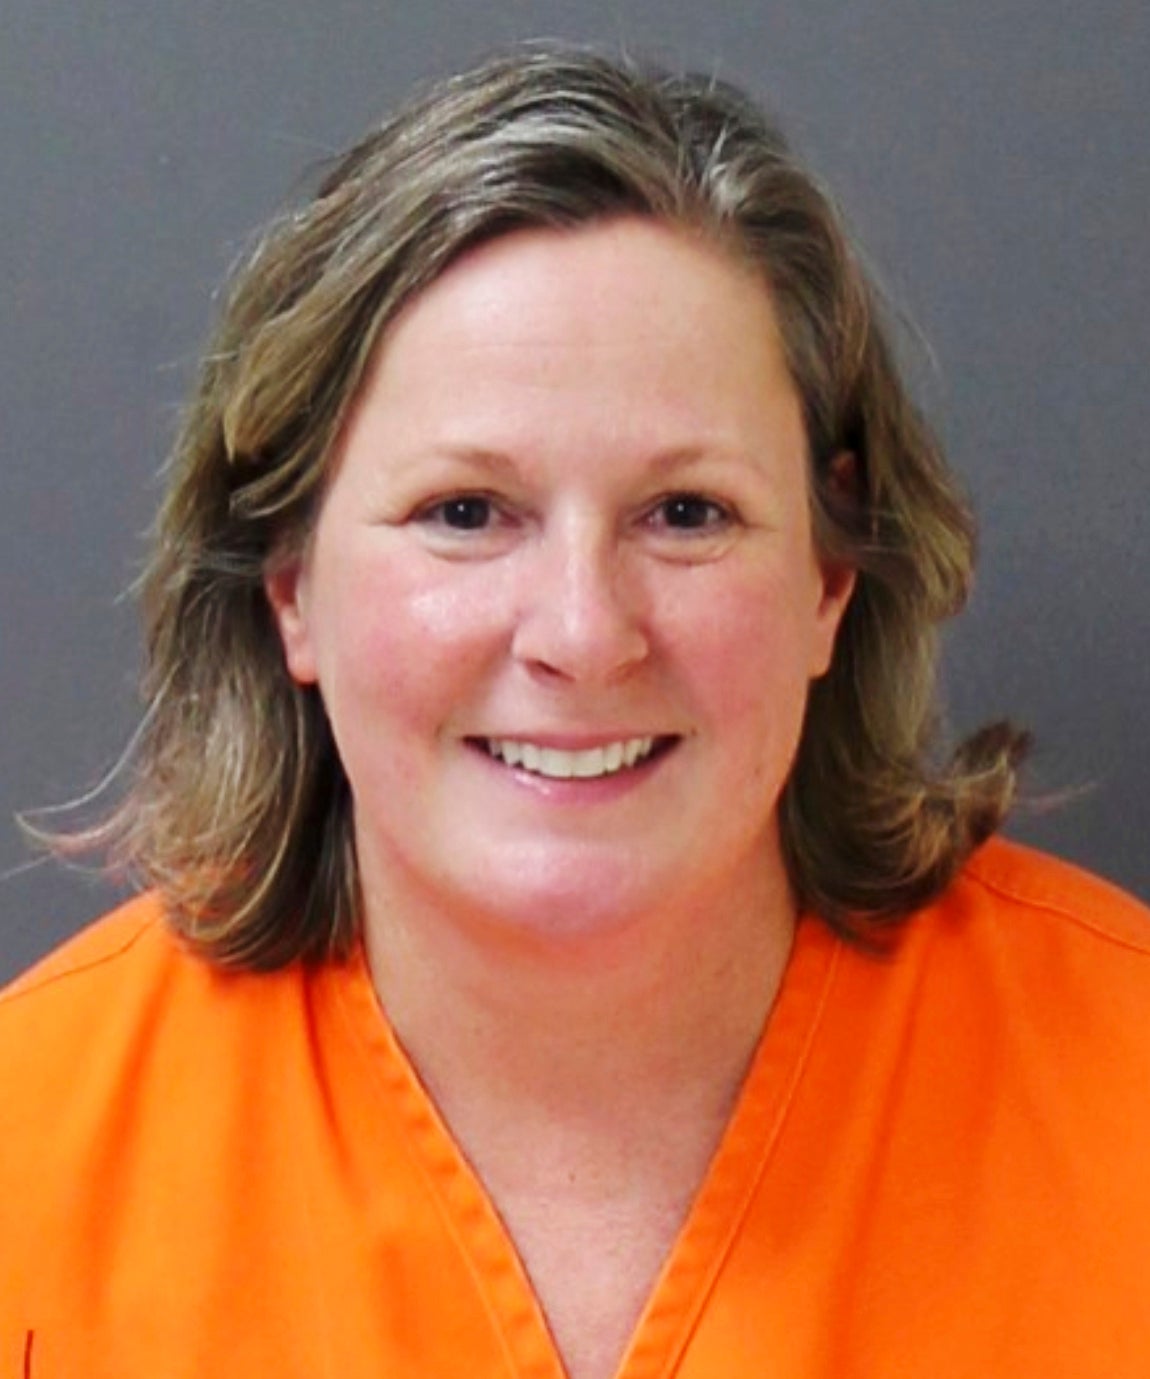 Kim Potter smiles in her mugshot after being found guilty on all charges